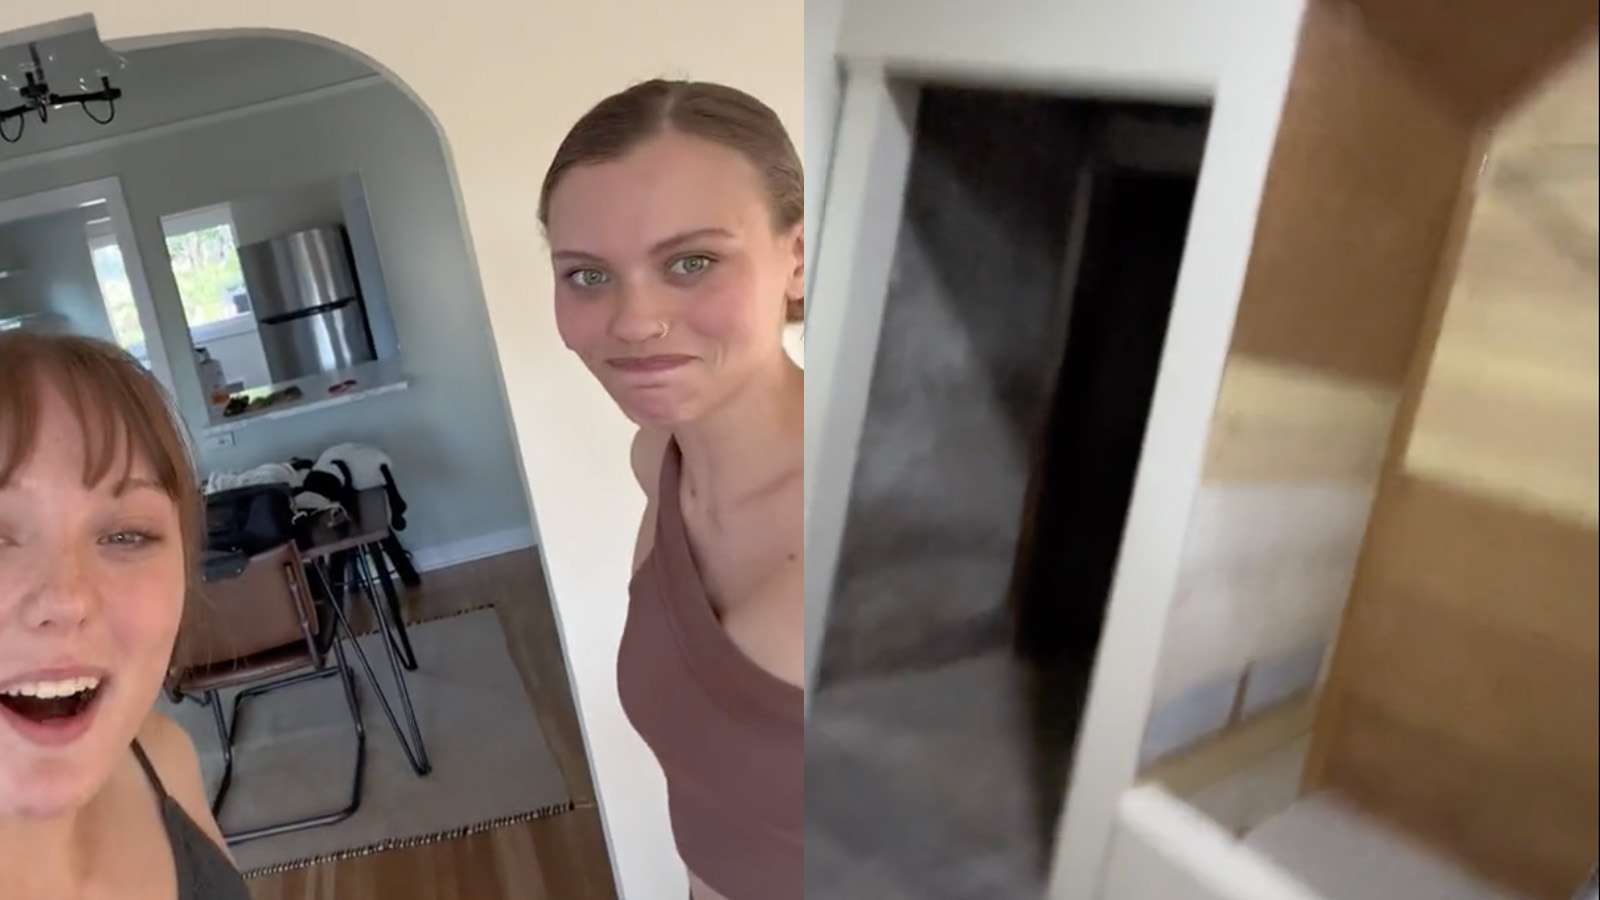 TikTokers shocked to discover Airbnb comes with peepholes, hidden rooms, and secret tunnels